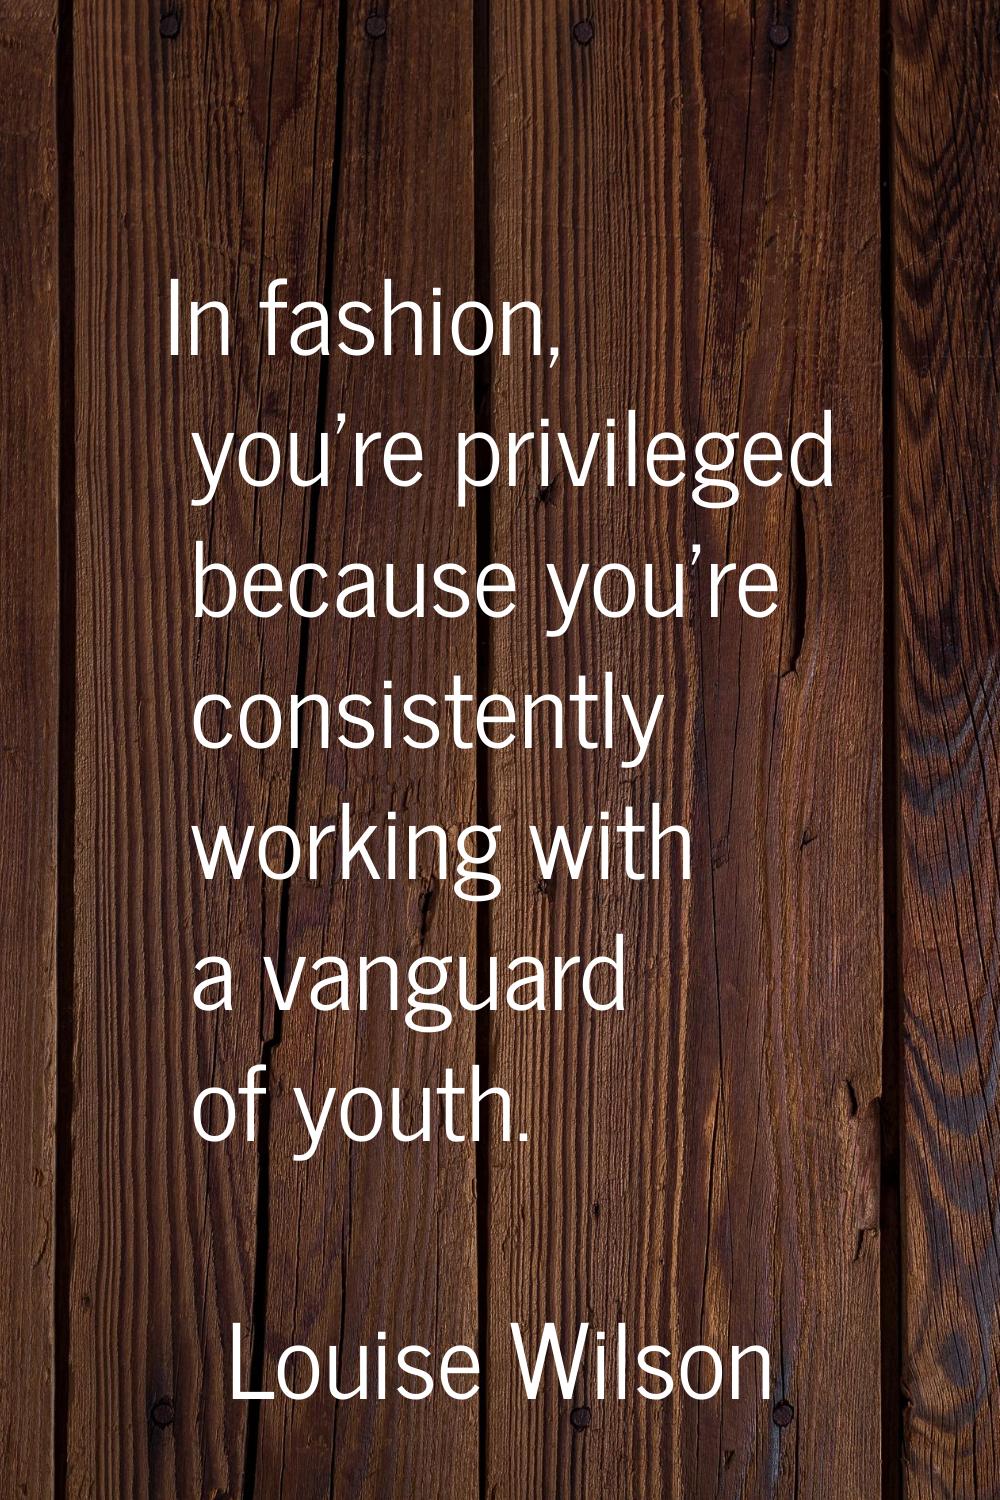 In fashion, you're privileged because you're consistently working with a vanguard of youth.